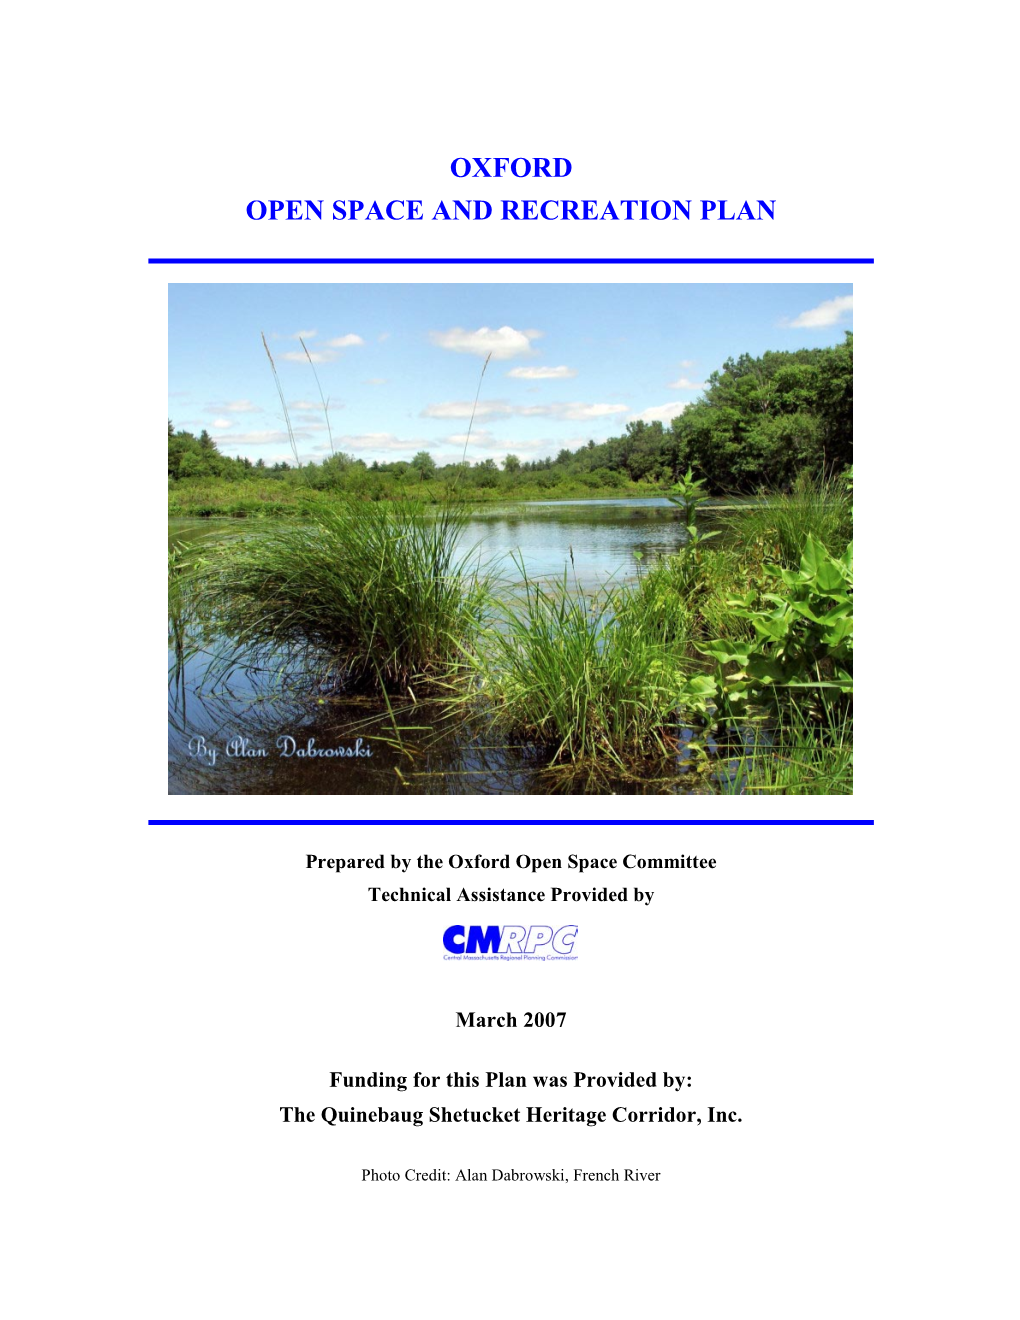 Open Space and Recreation Plan